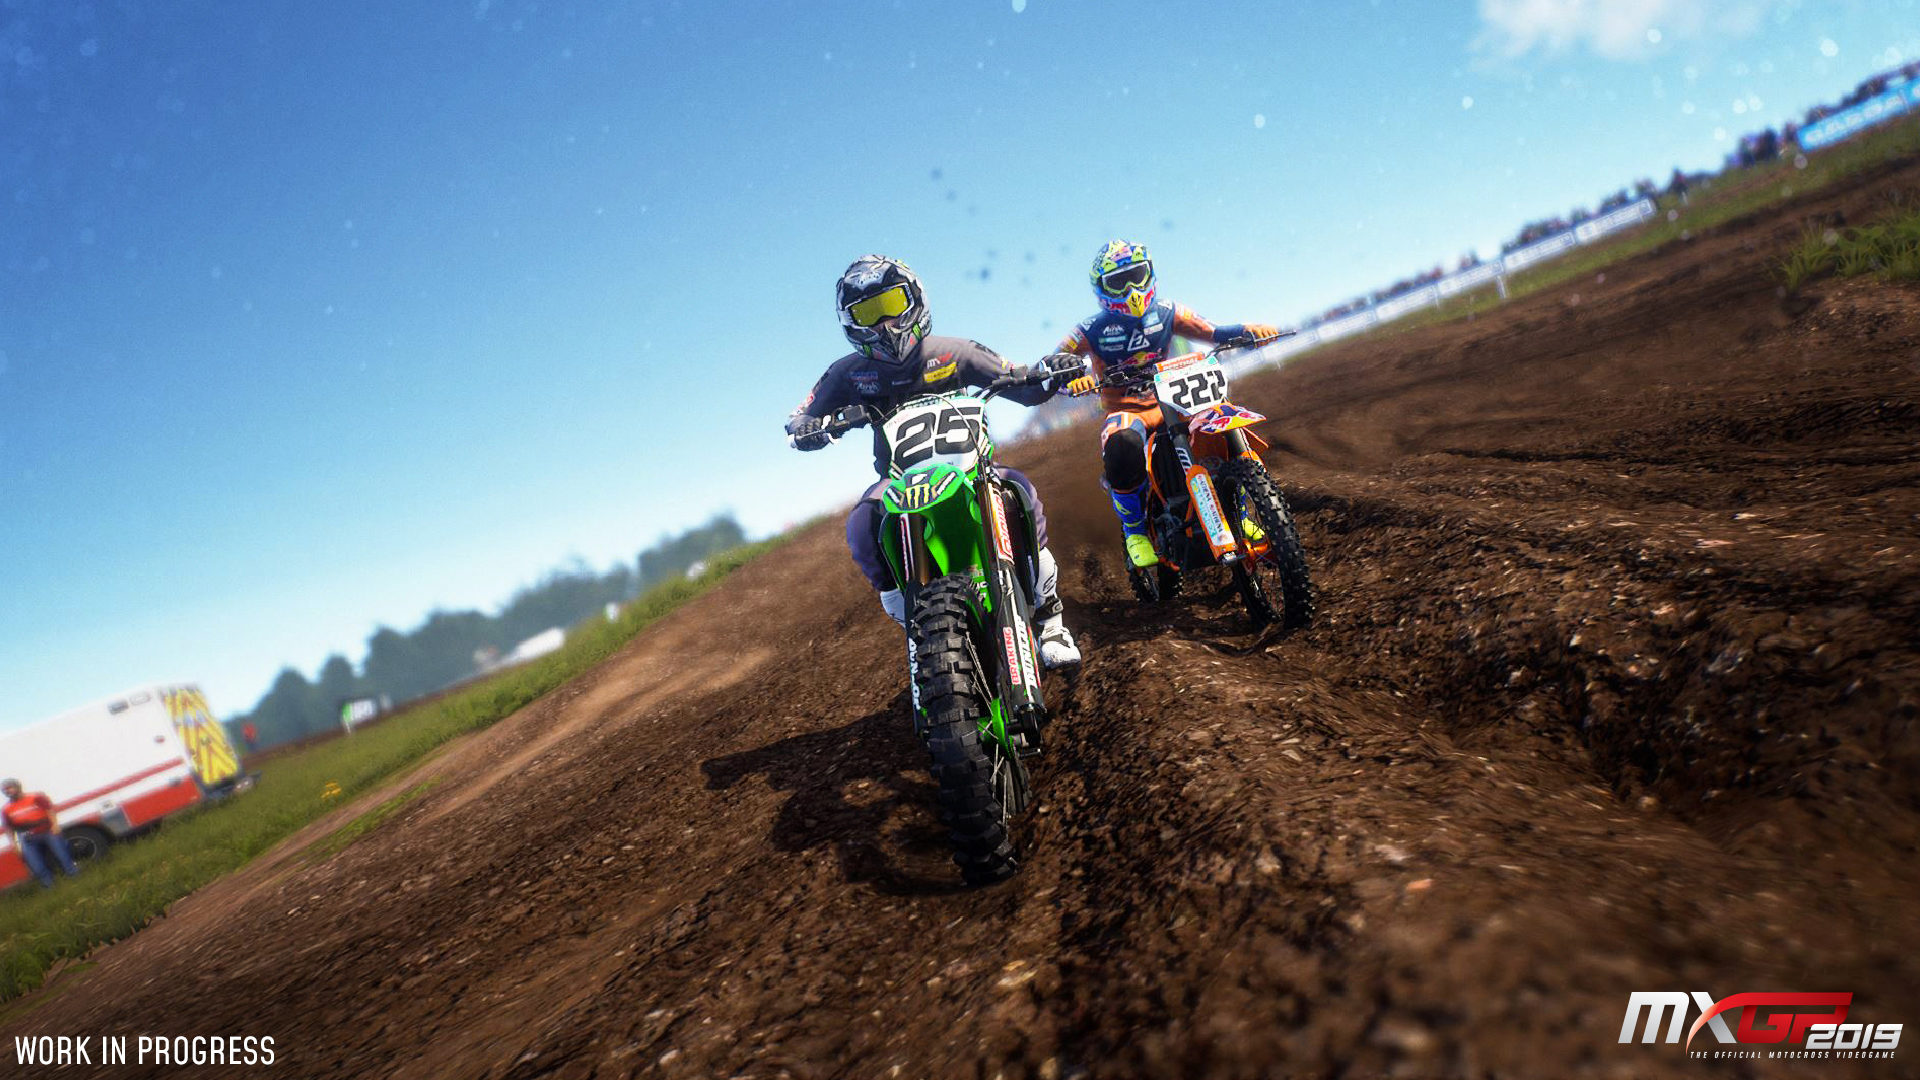 MXGP 2019: The Official Motocross Video Game - Xbox One 